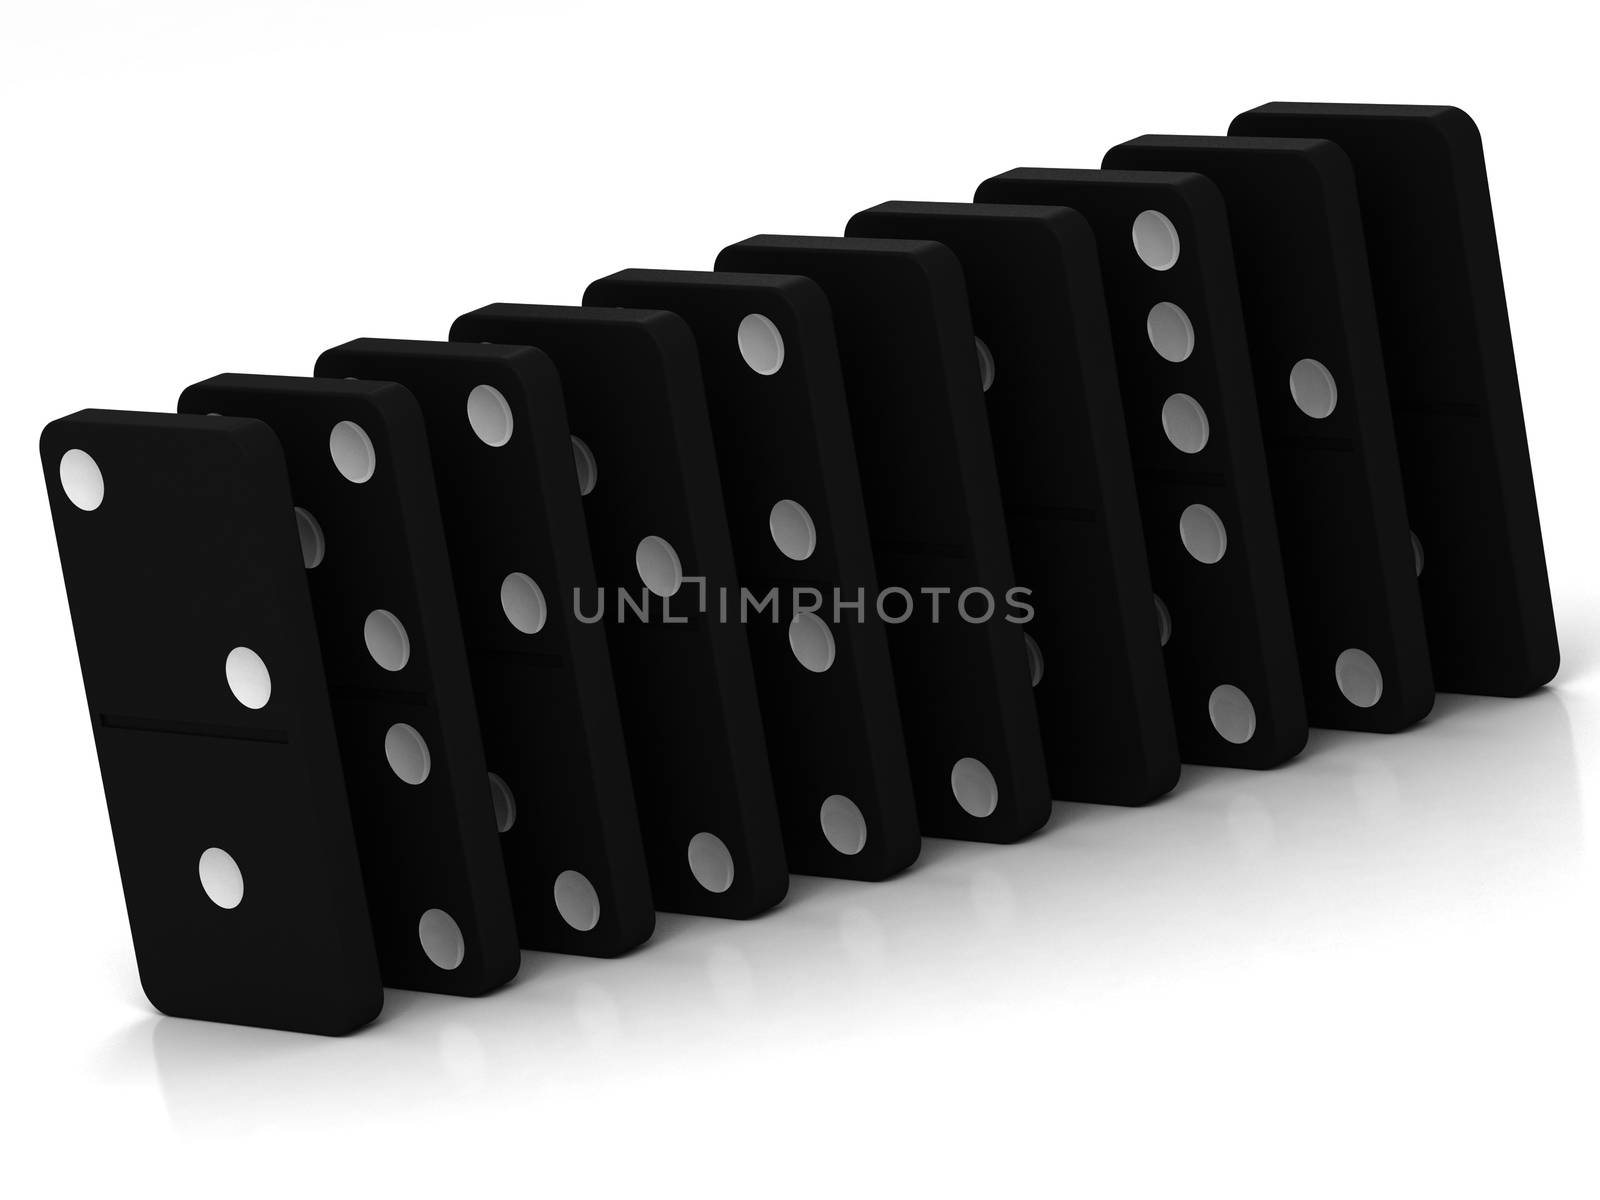 black dominoes falling over on a white background